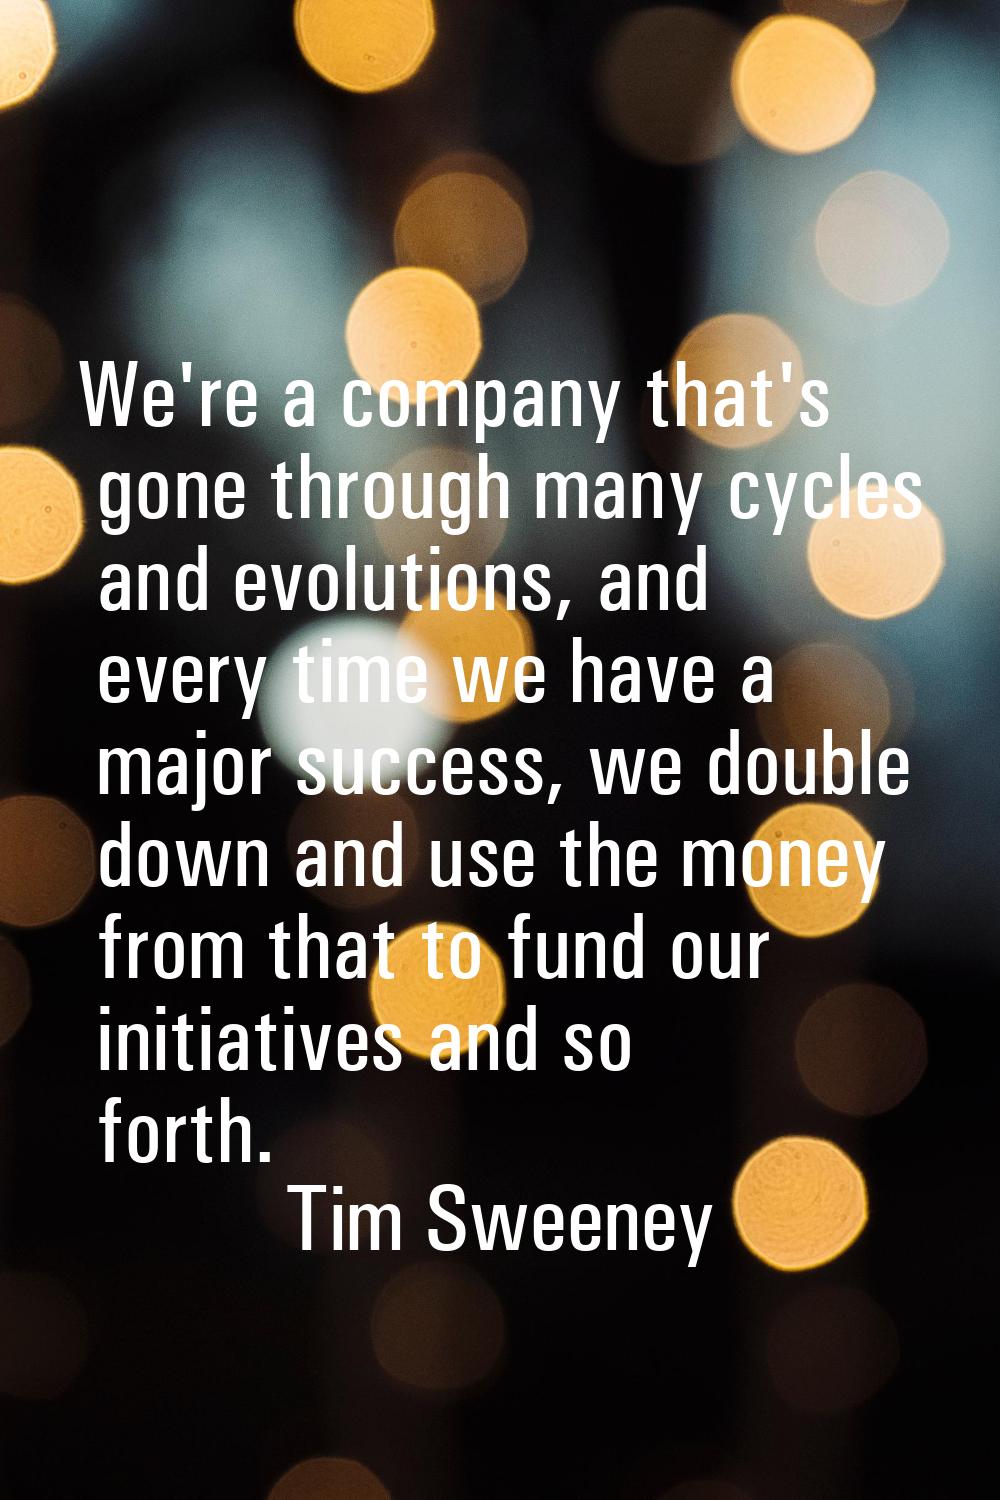 We're a company that's gone through many cycles and evolutions, and every time we have a major succ